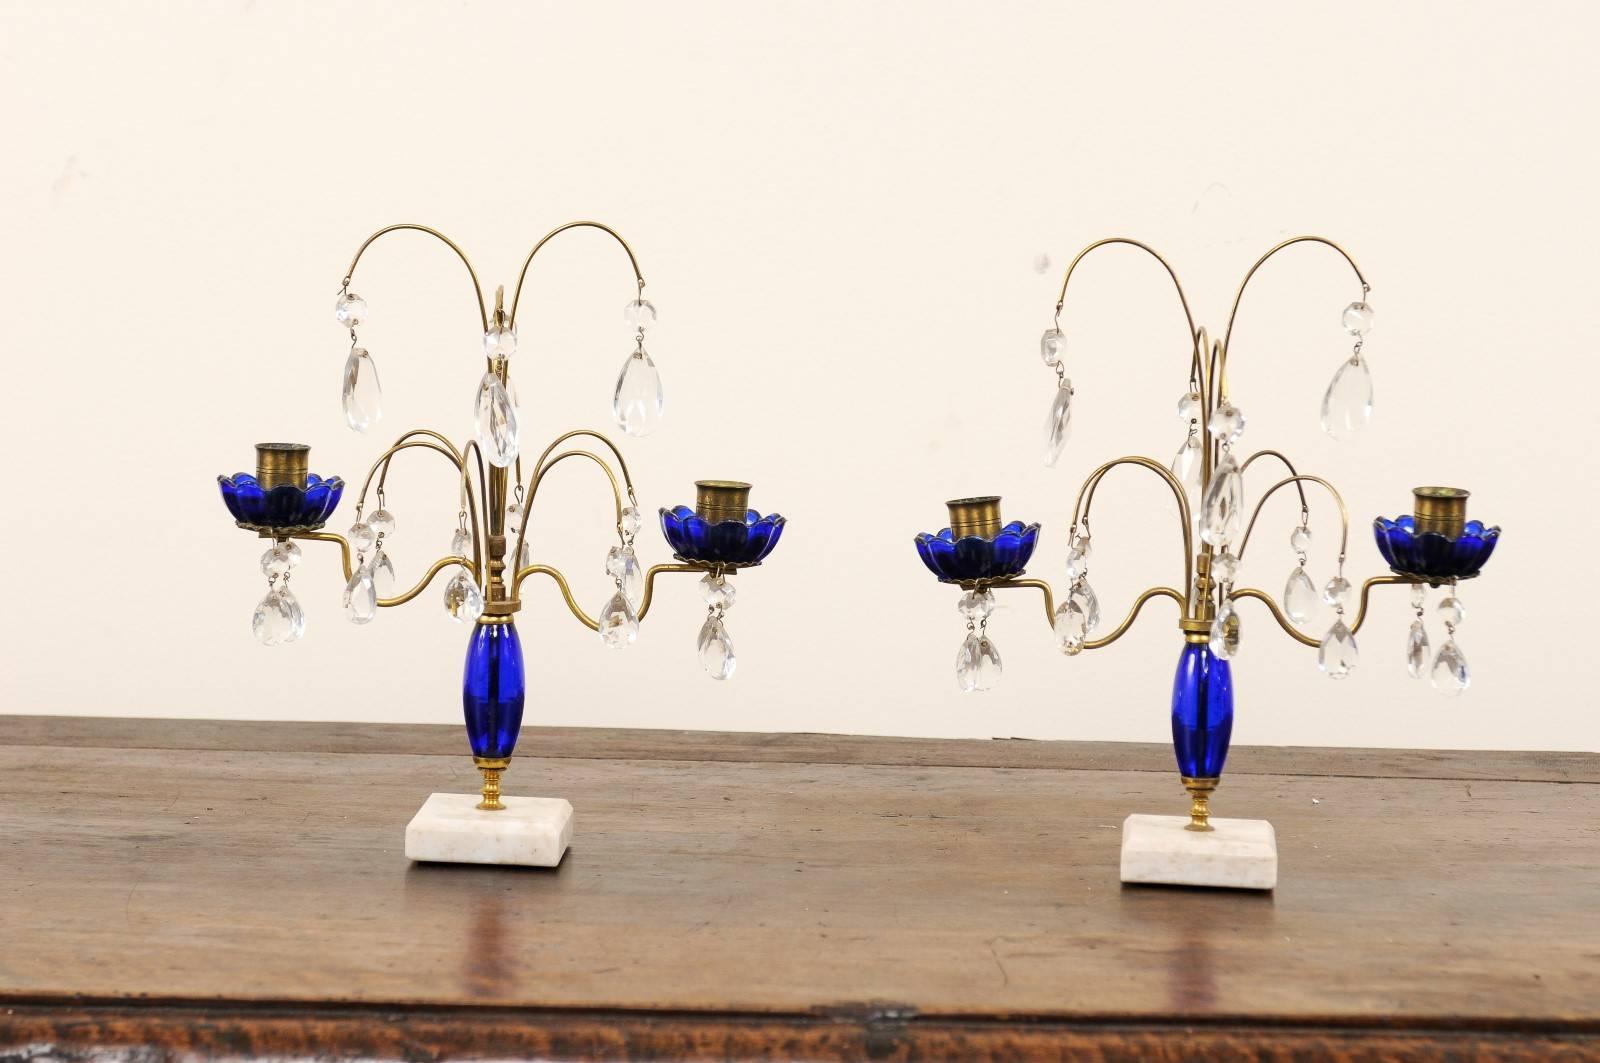 A Pair of 19th century Swedish crystal and cobalt glass girandoles. This pair of neoclassical Swedish two light girandoles each feature a central column of cobalt blue glass with matching cobalt bobeches. There are various crystals freely hanging